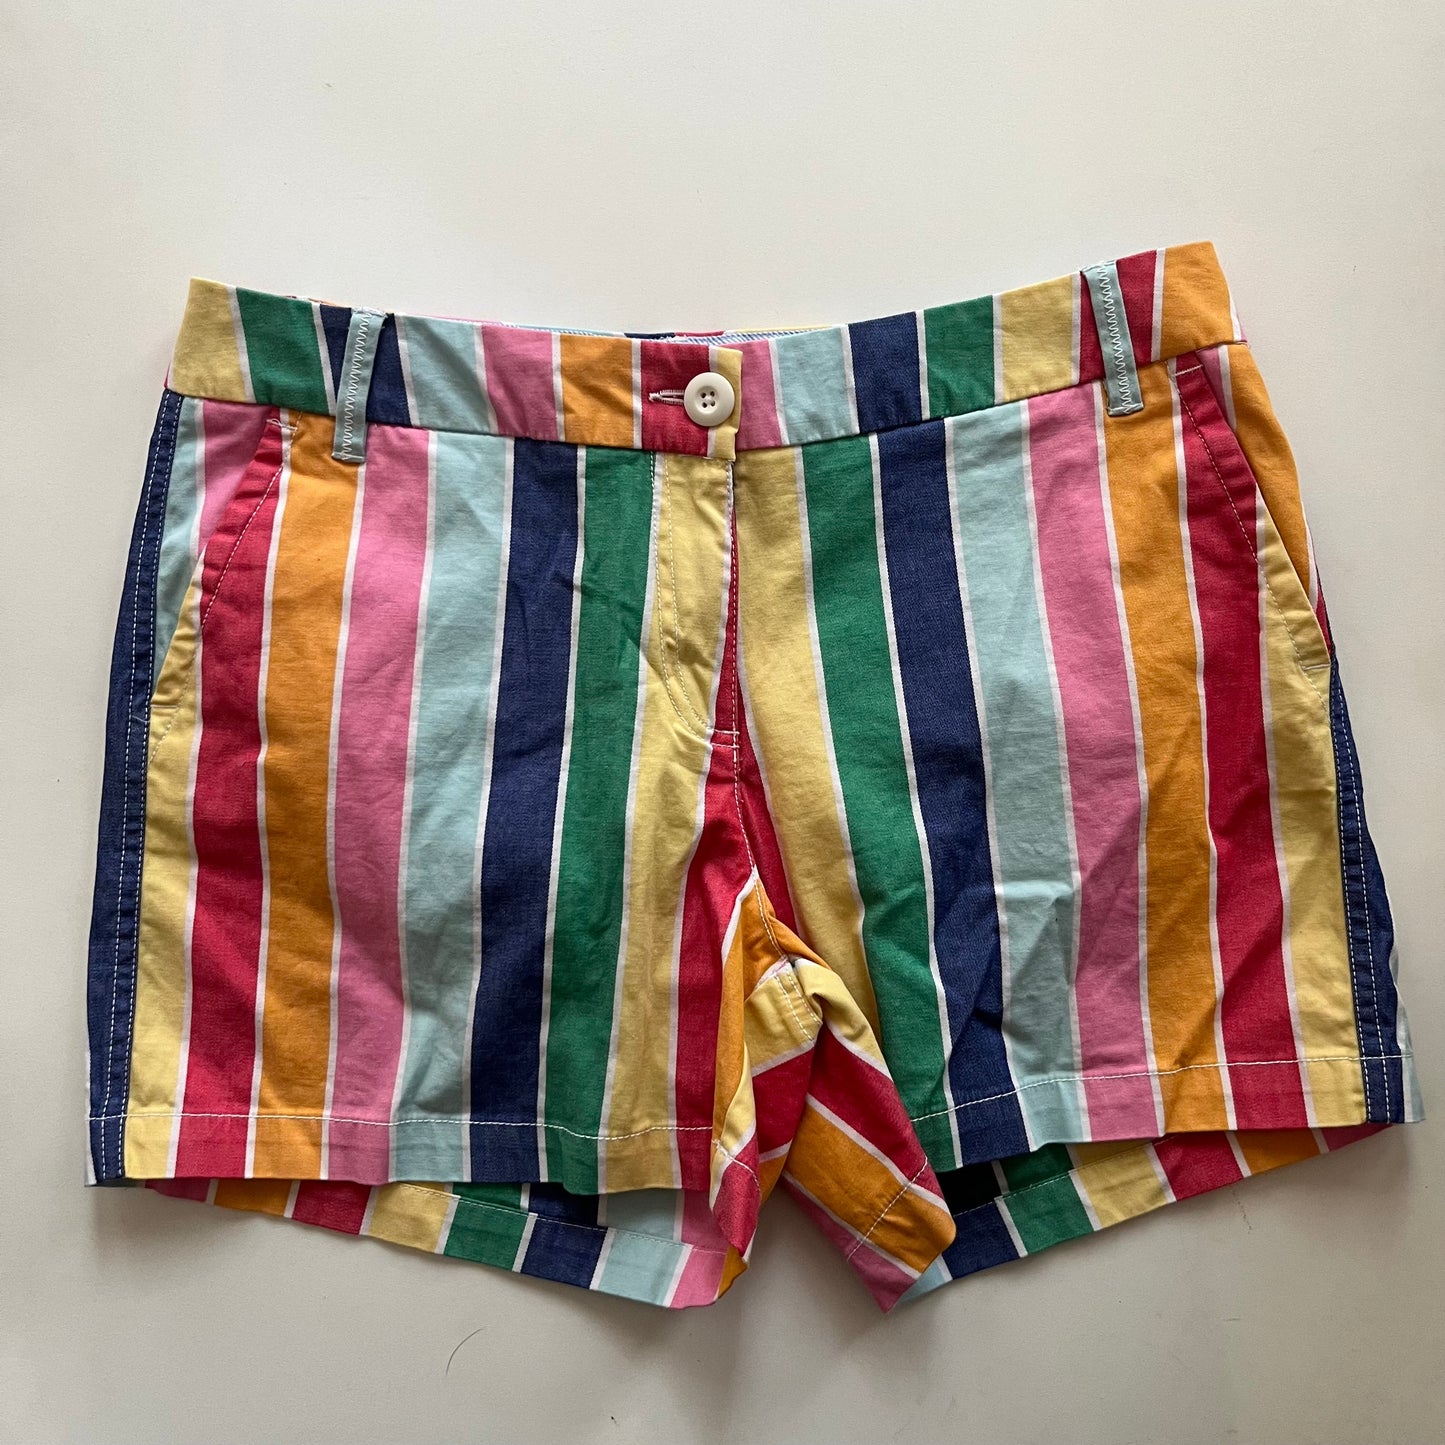 Striped Shorts Crown And Ivy, Size 8